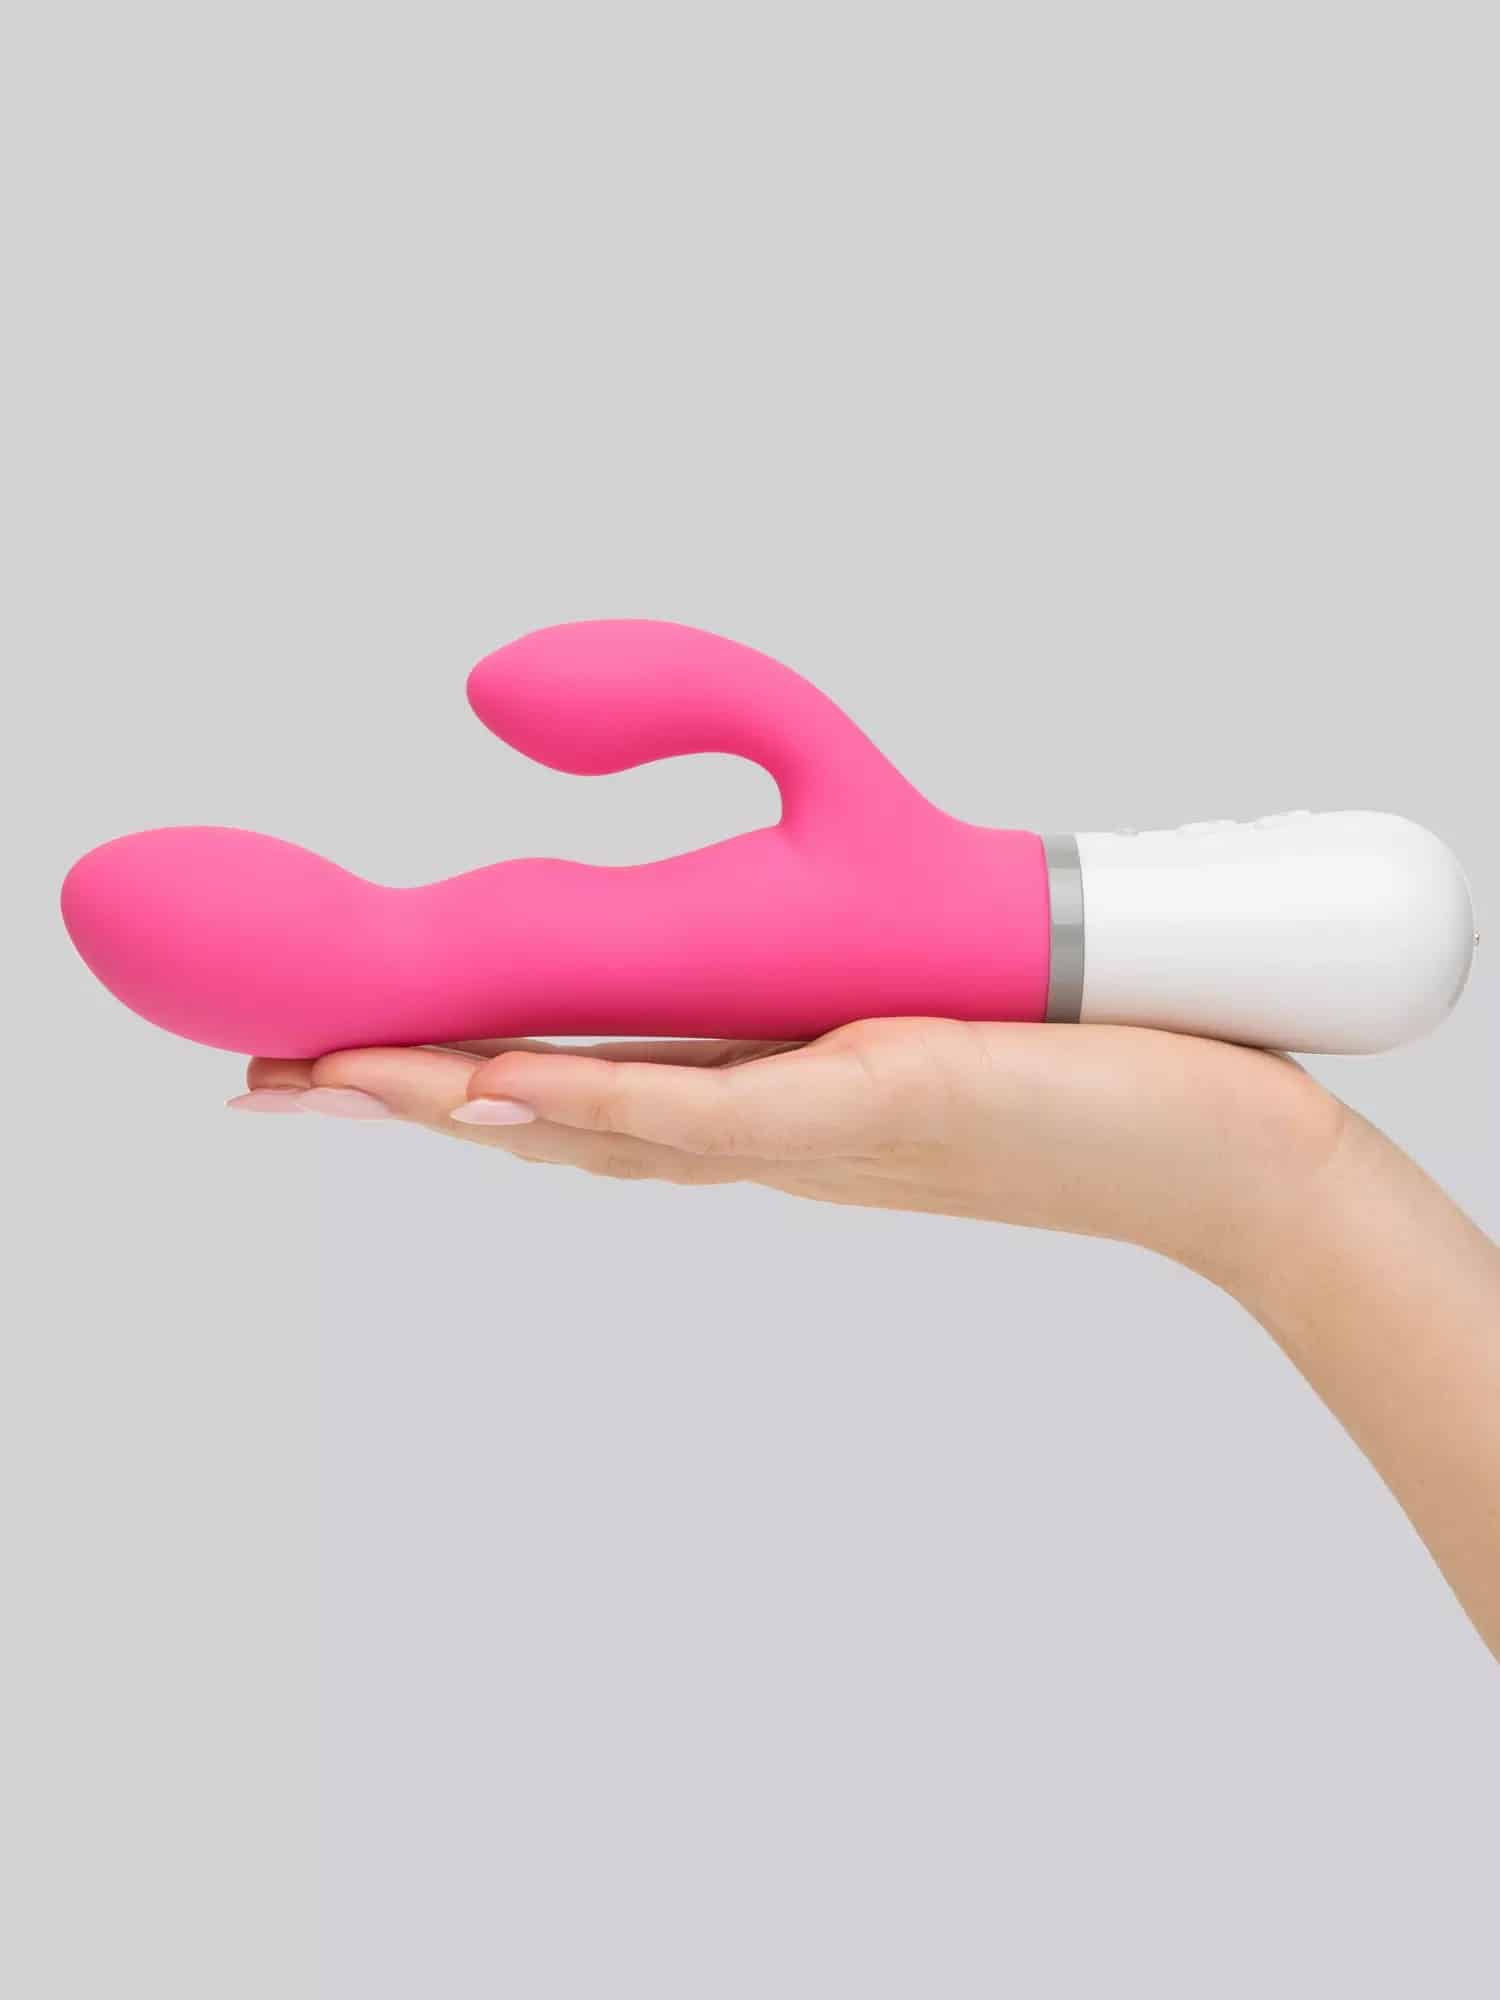 Lovense Nora App Controlled Rechargeable Rotating Rabbit Vibrator. Slide 14